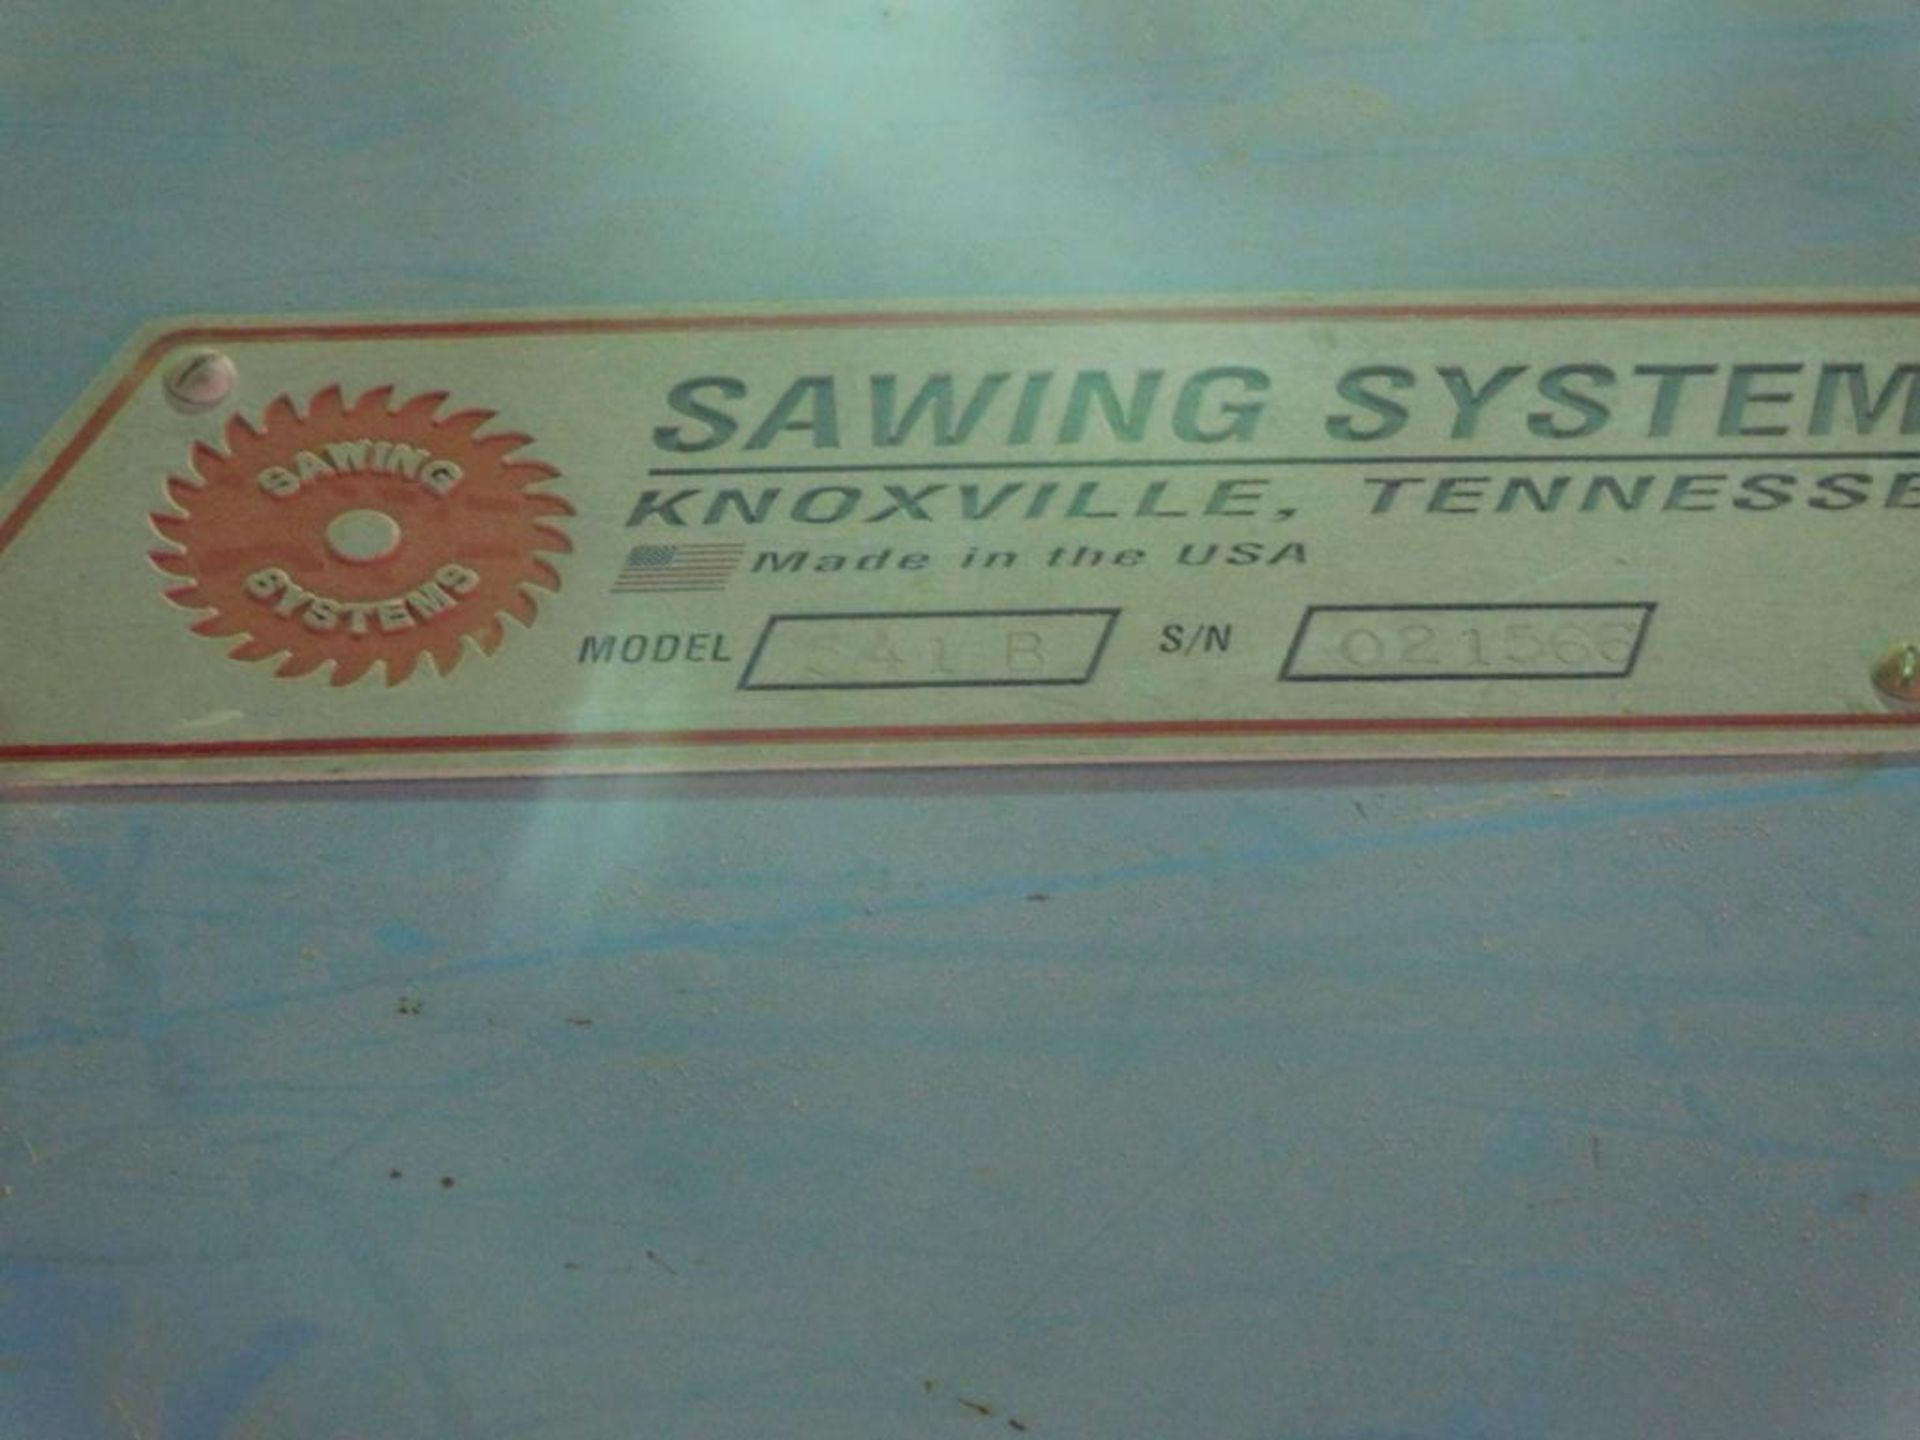 Sawing Systems Stone Saw Model 541B, S/N 021566 - Image 6 of 6